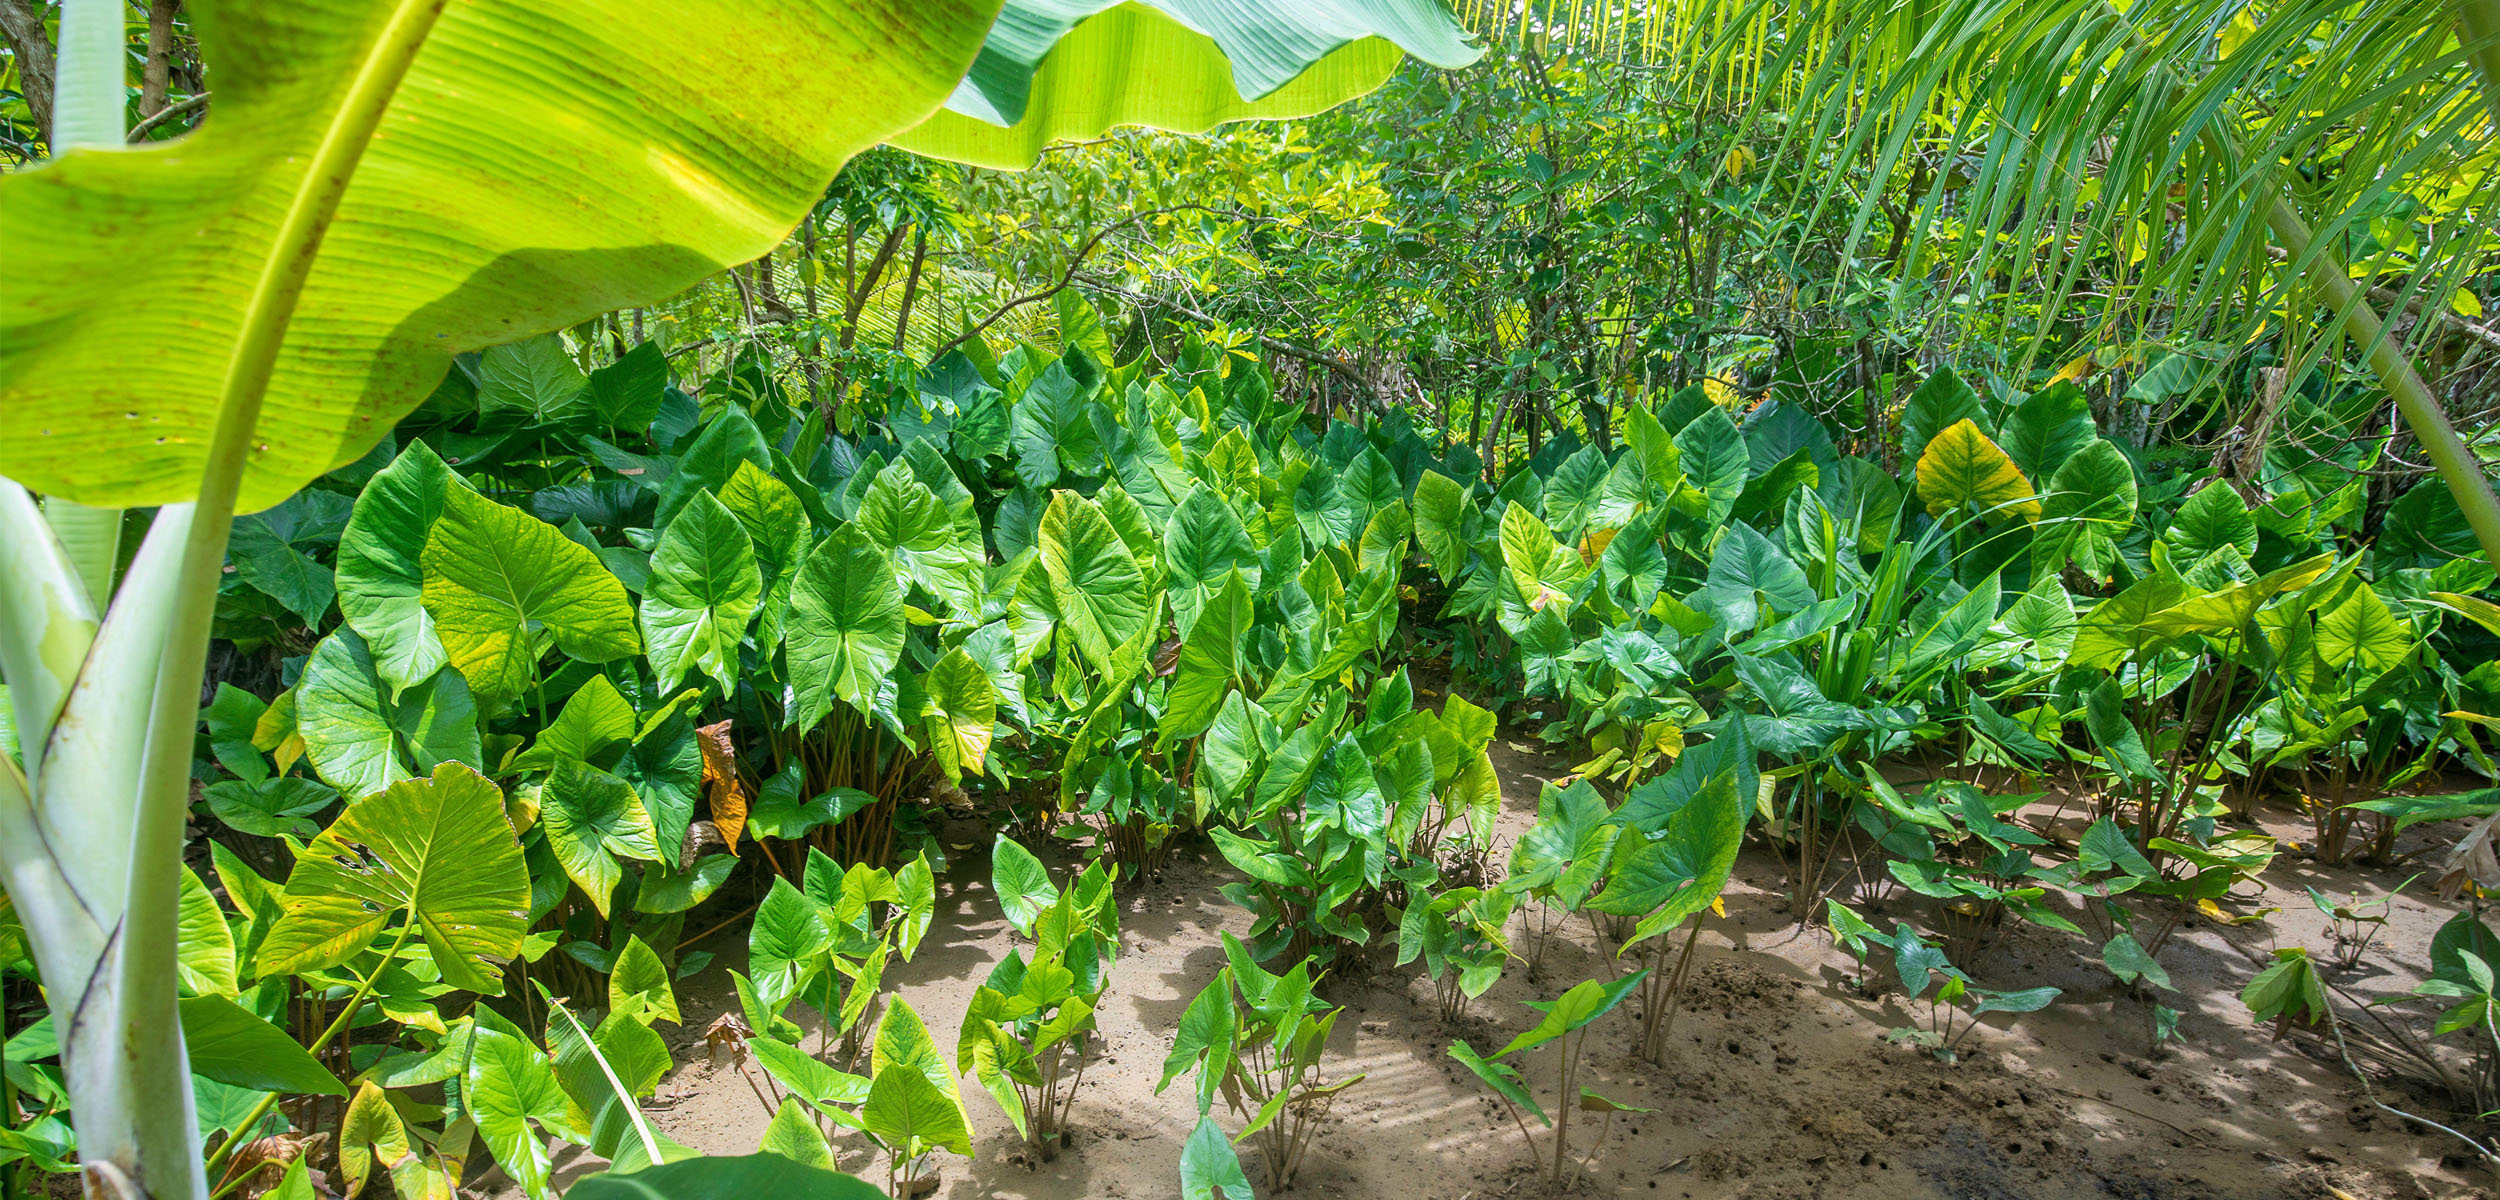 A green field of shiny taro plants with one big plant in the left foreground